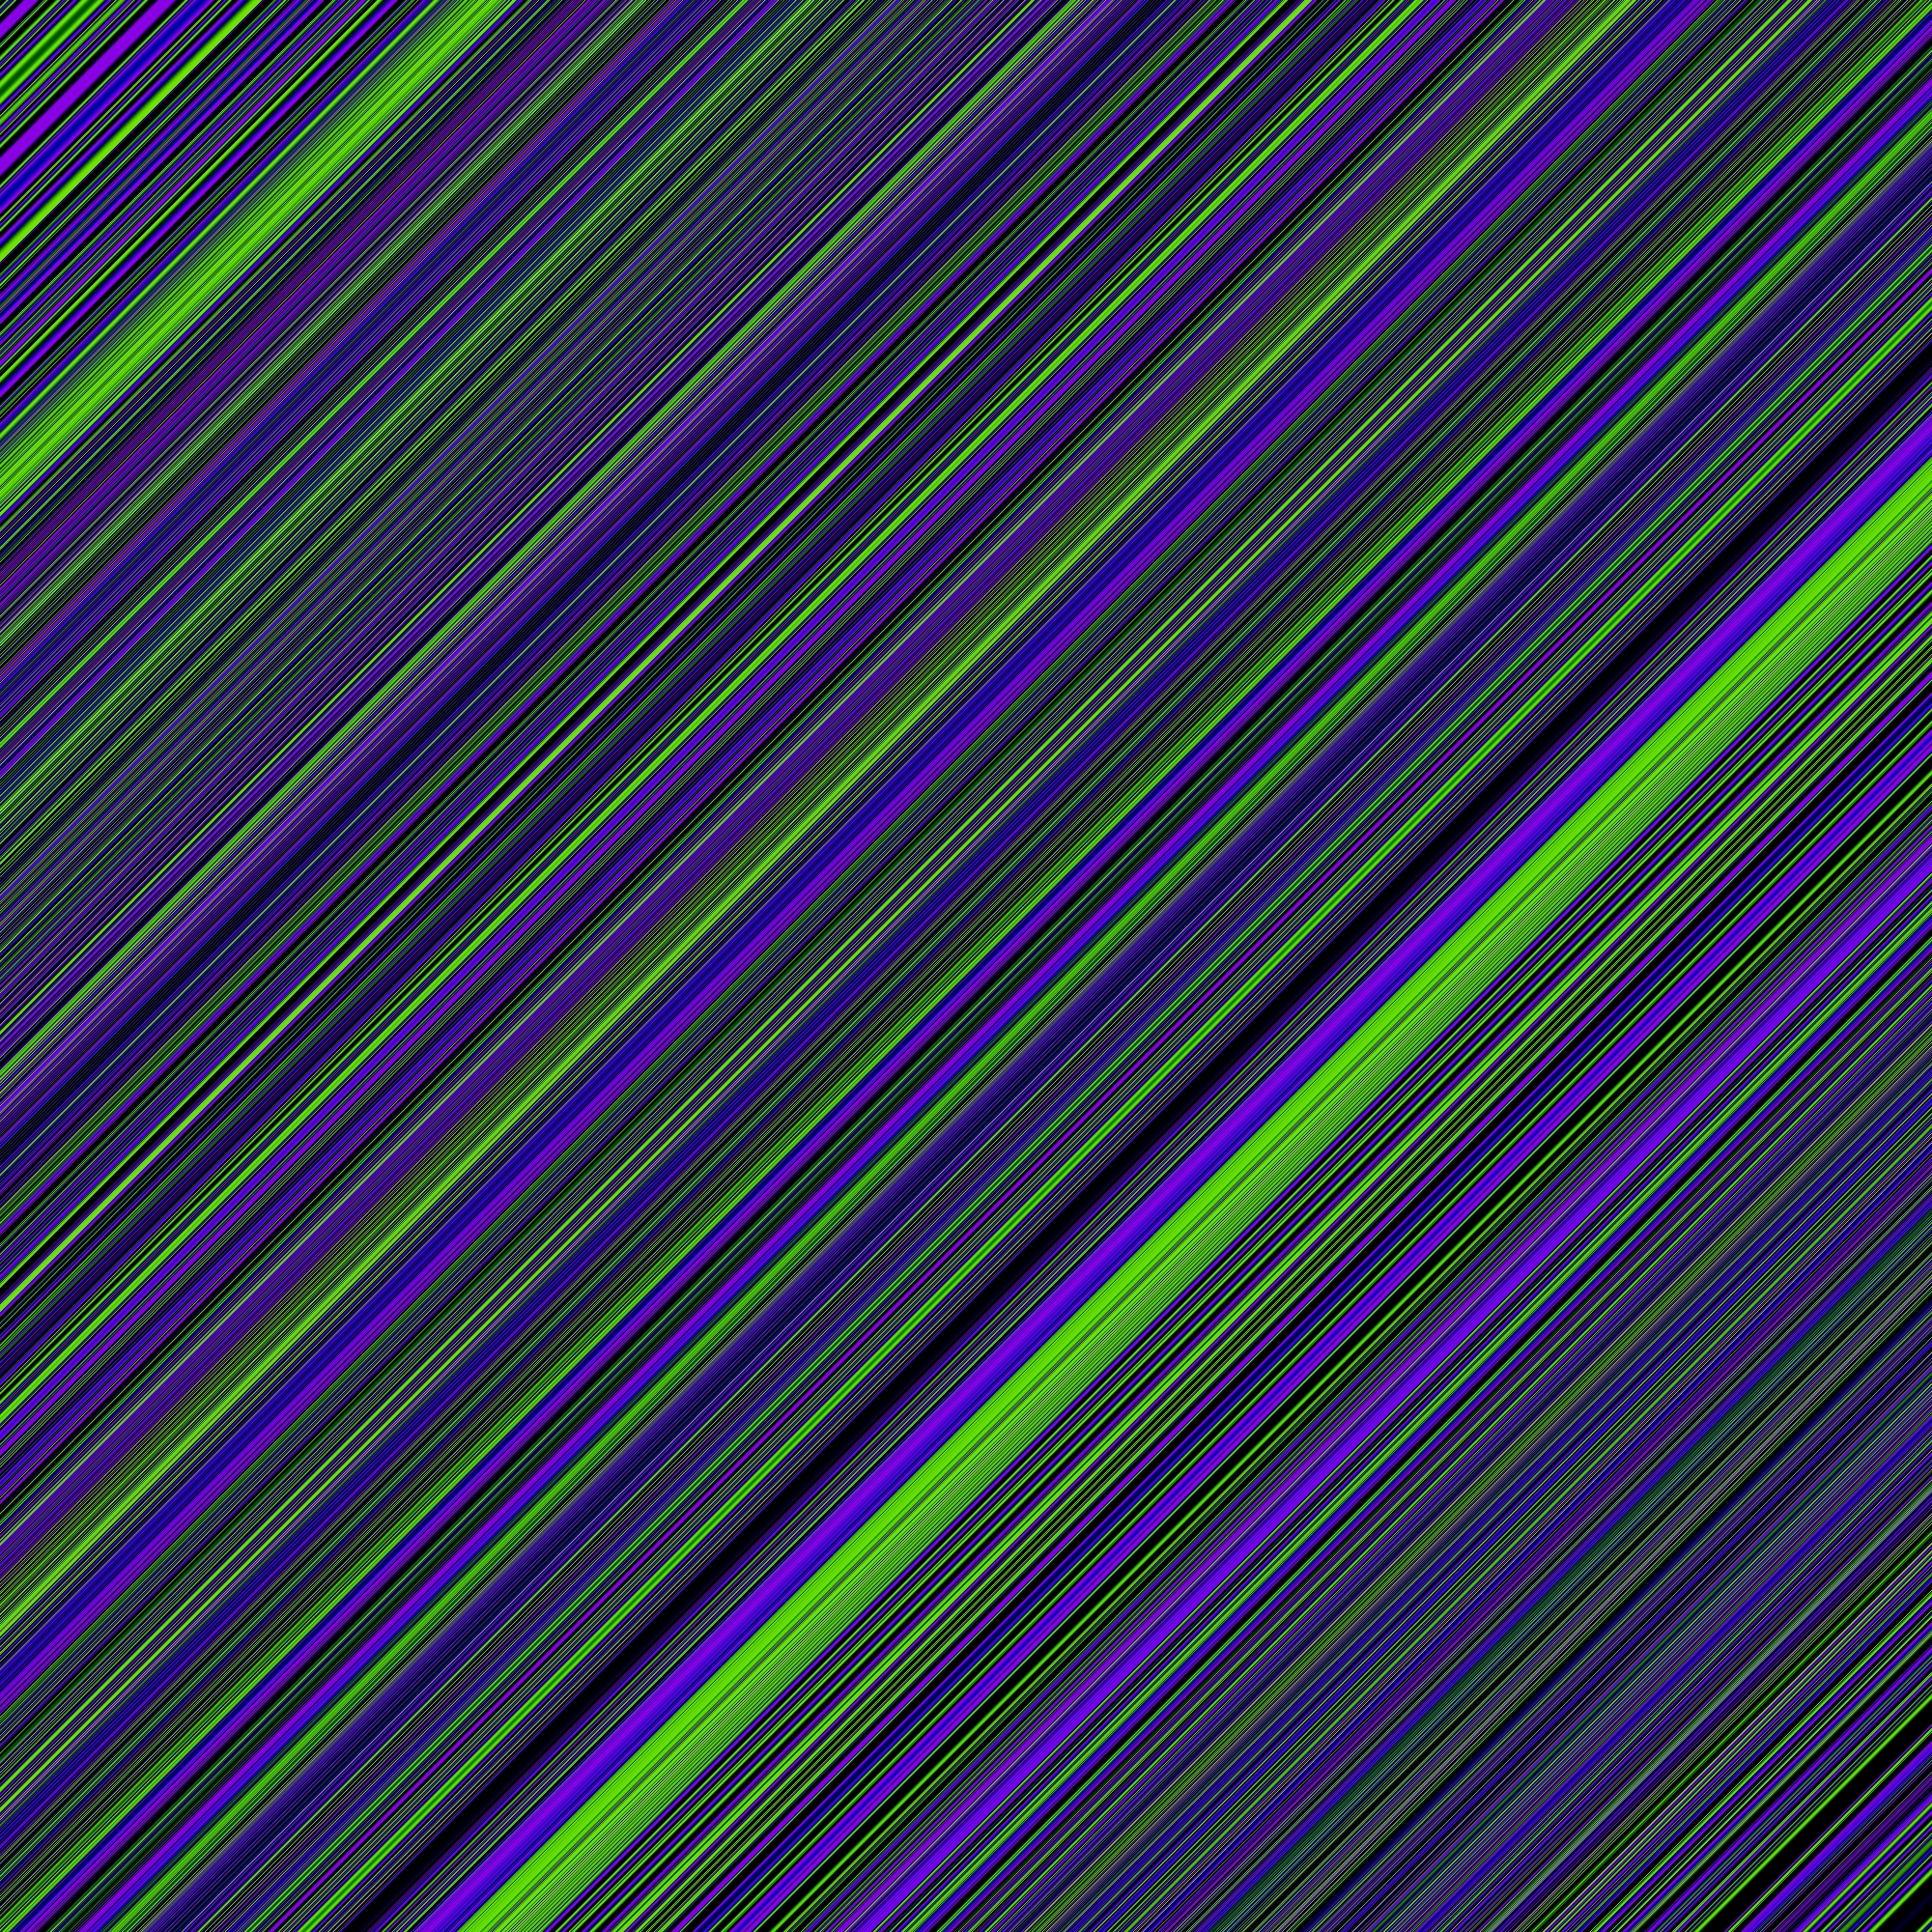 Download wallpaper 2000x2000 lines, obliquely, purple, green HD background